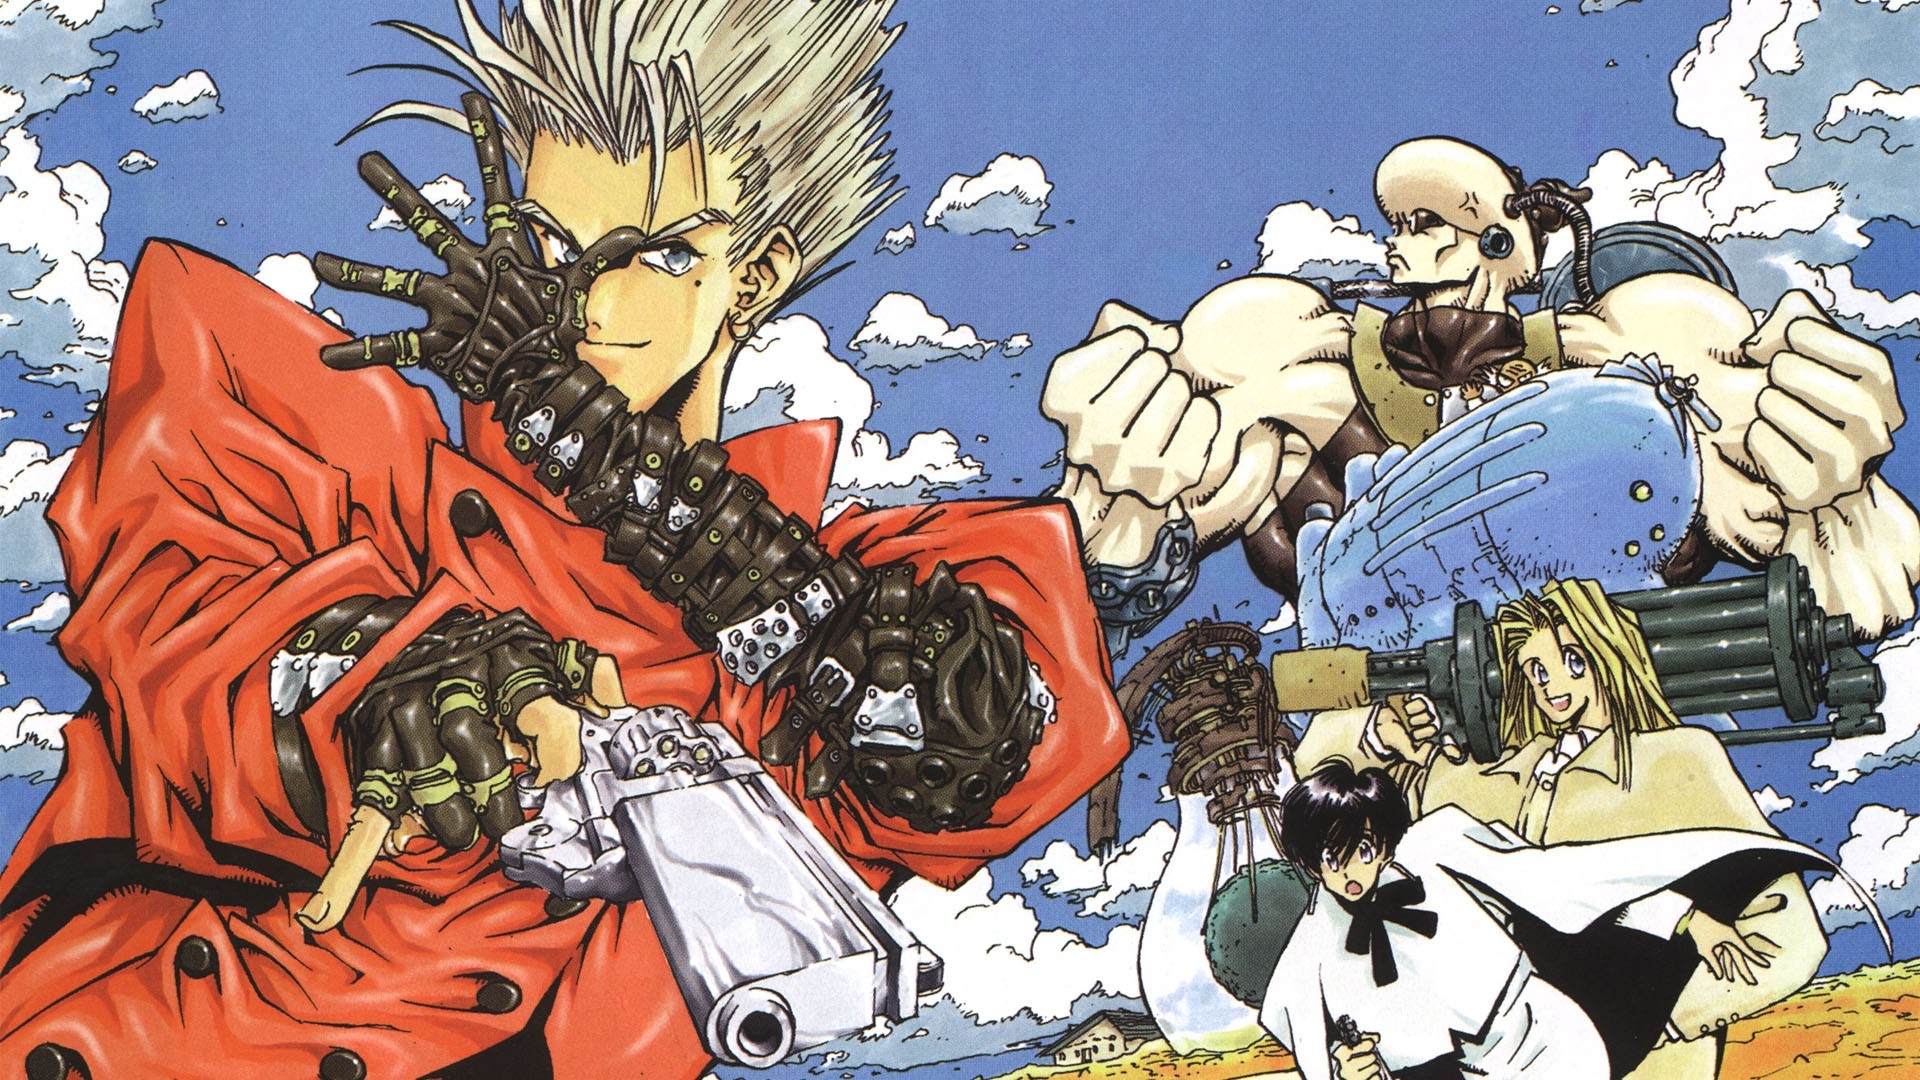 Trigun Source Keys anime, television, trigun, wallpaper, wallpapers. Submitted Anonymously 3 years ago